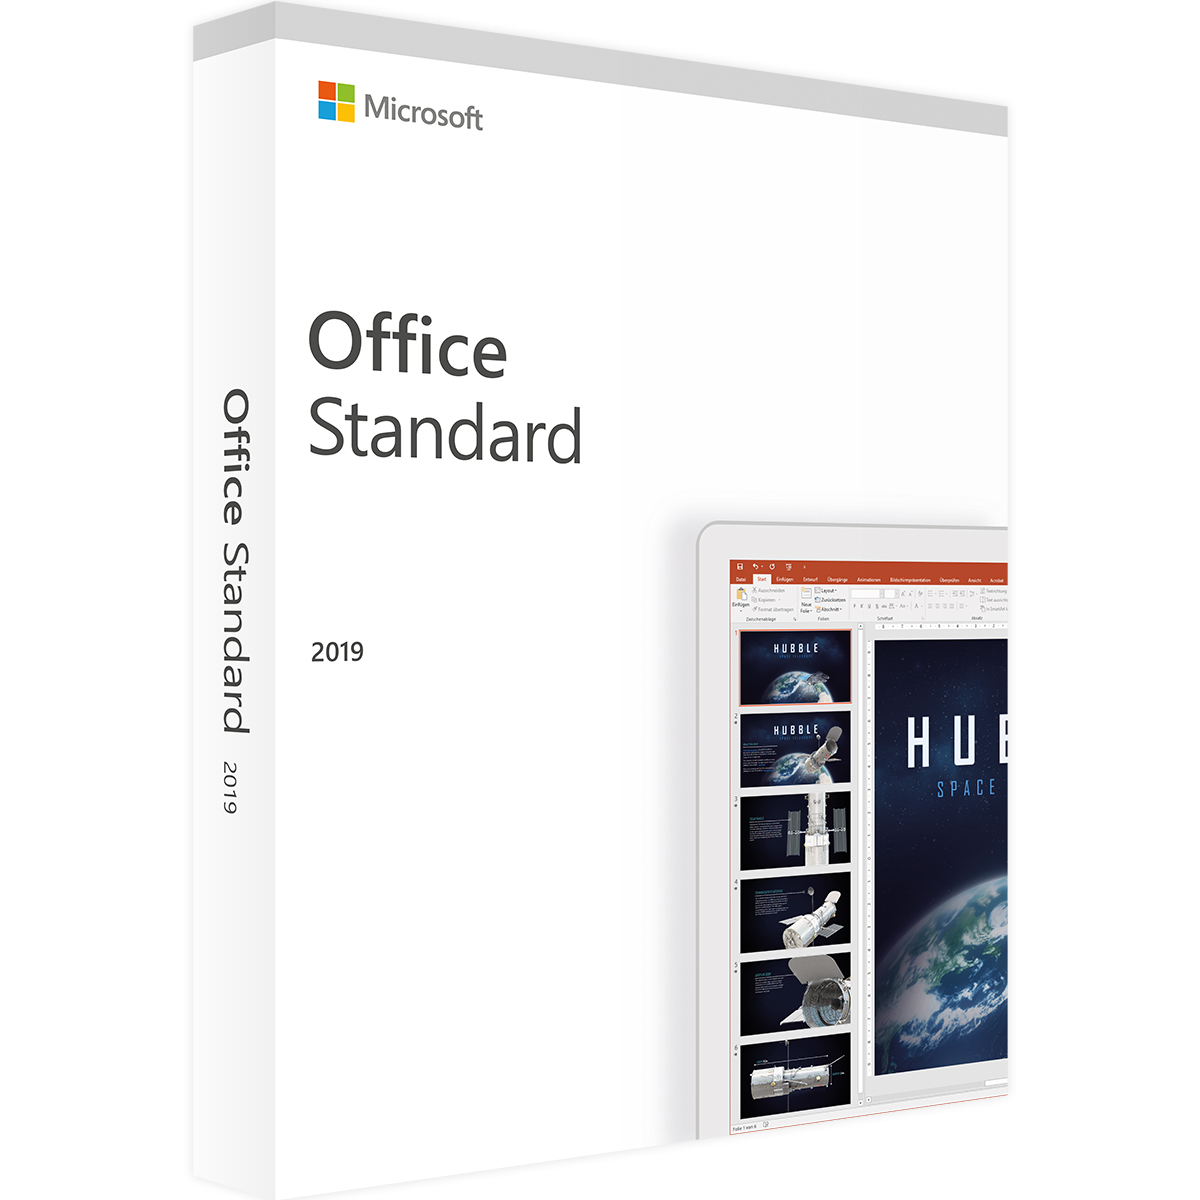 office 2019 standard download iso